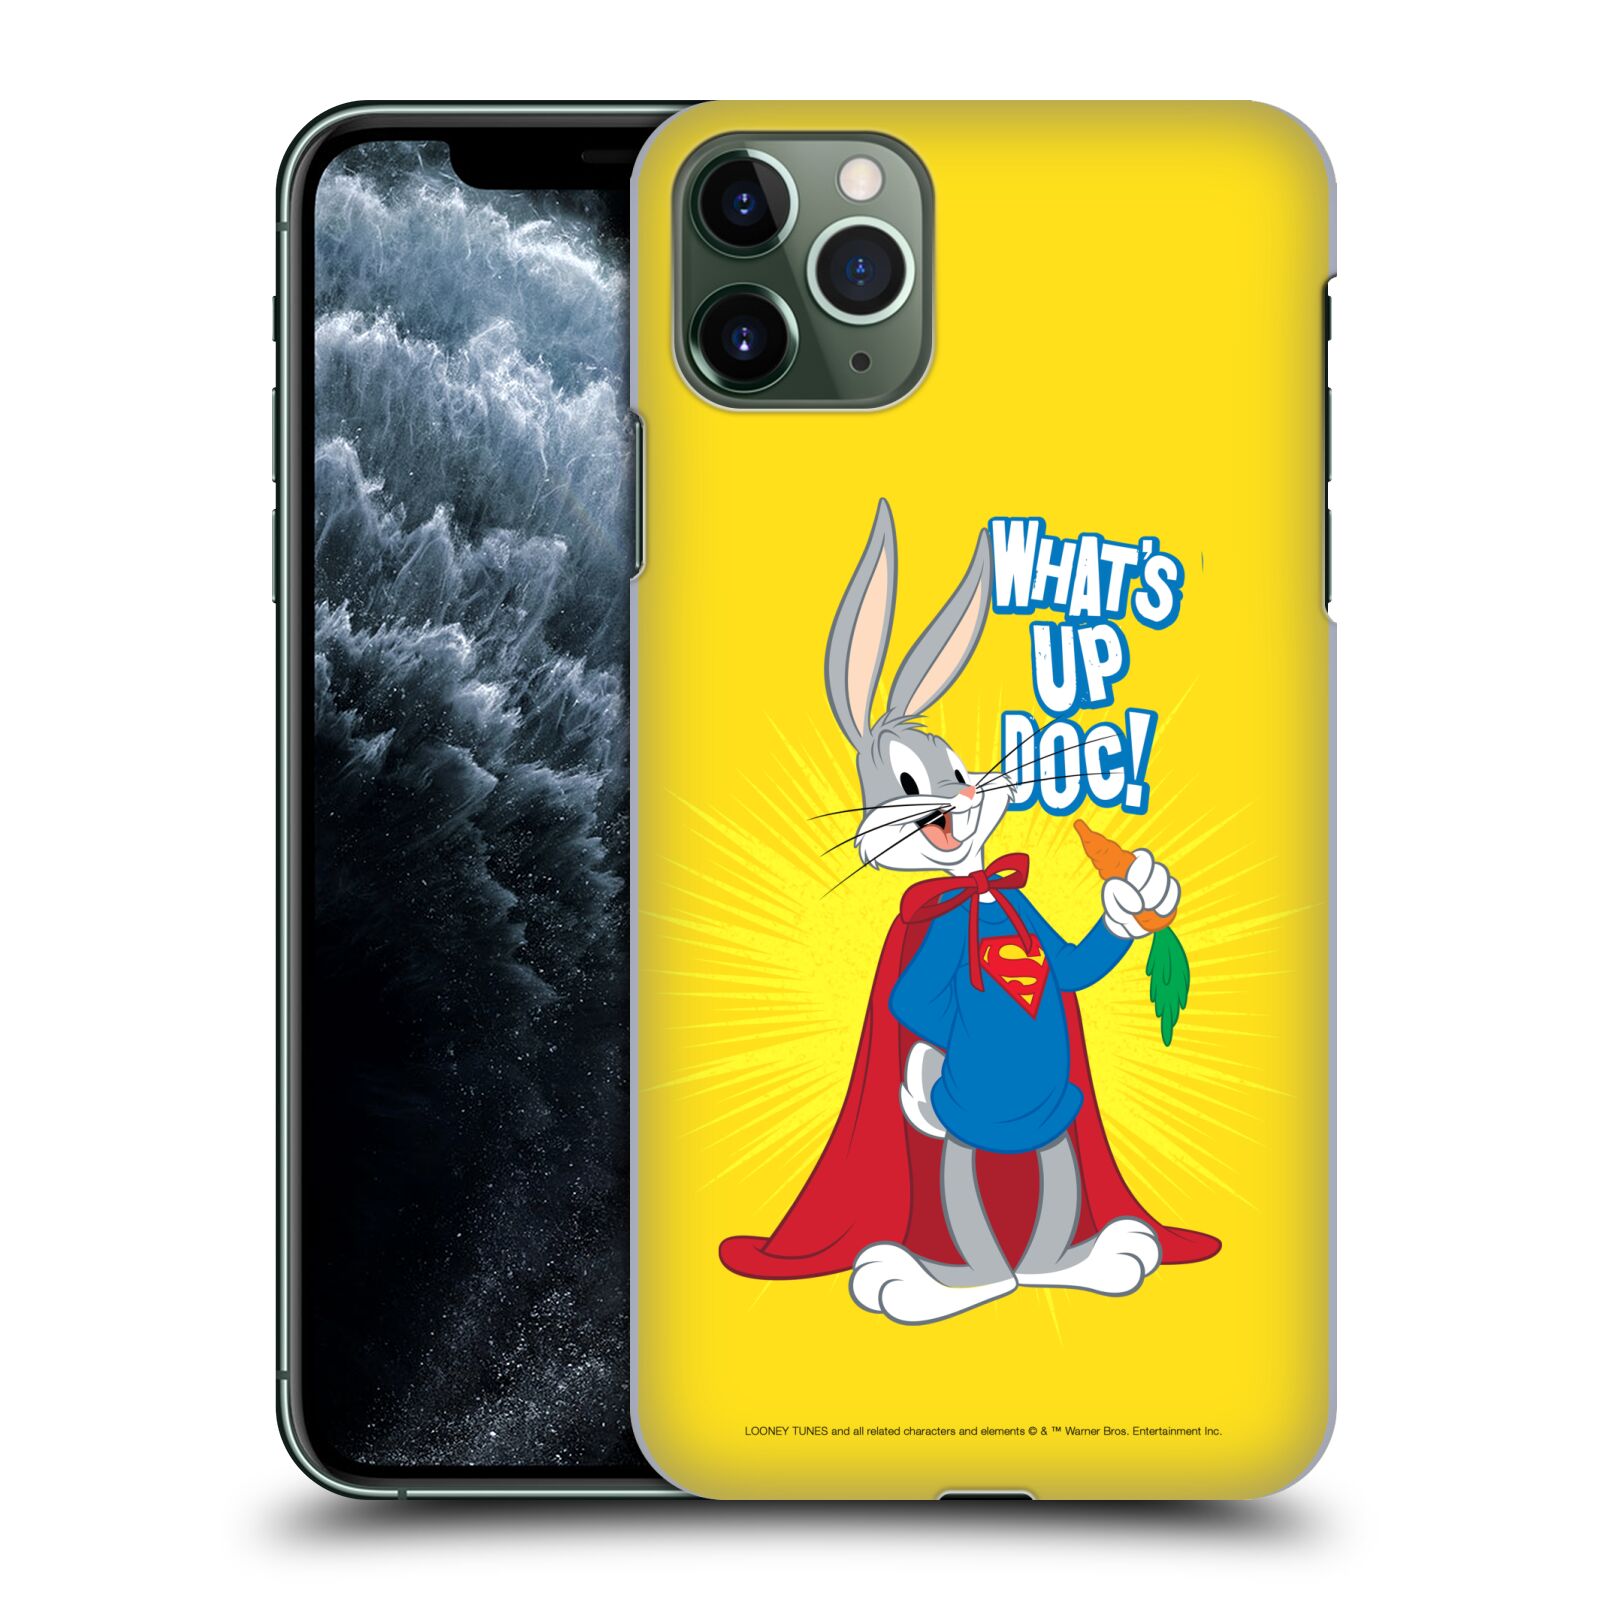 Bugs Bunny Hypebeast Hard Plastic Protective Clear Case Cover For